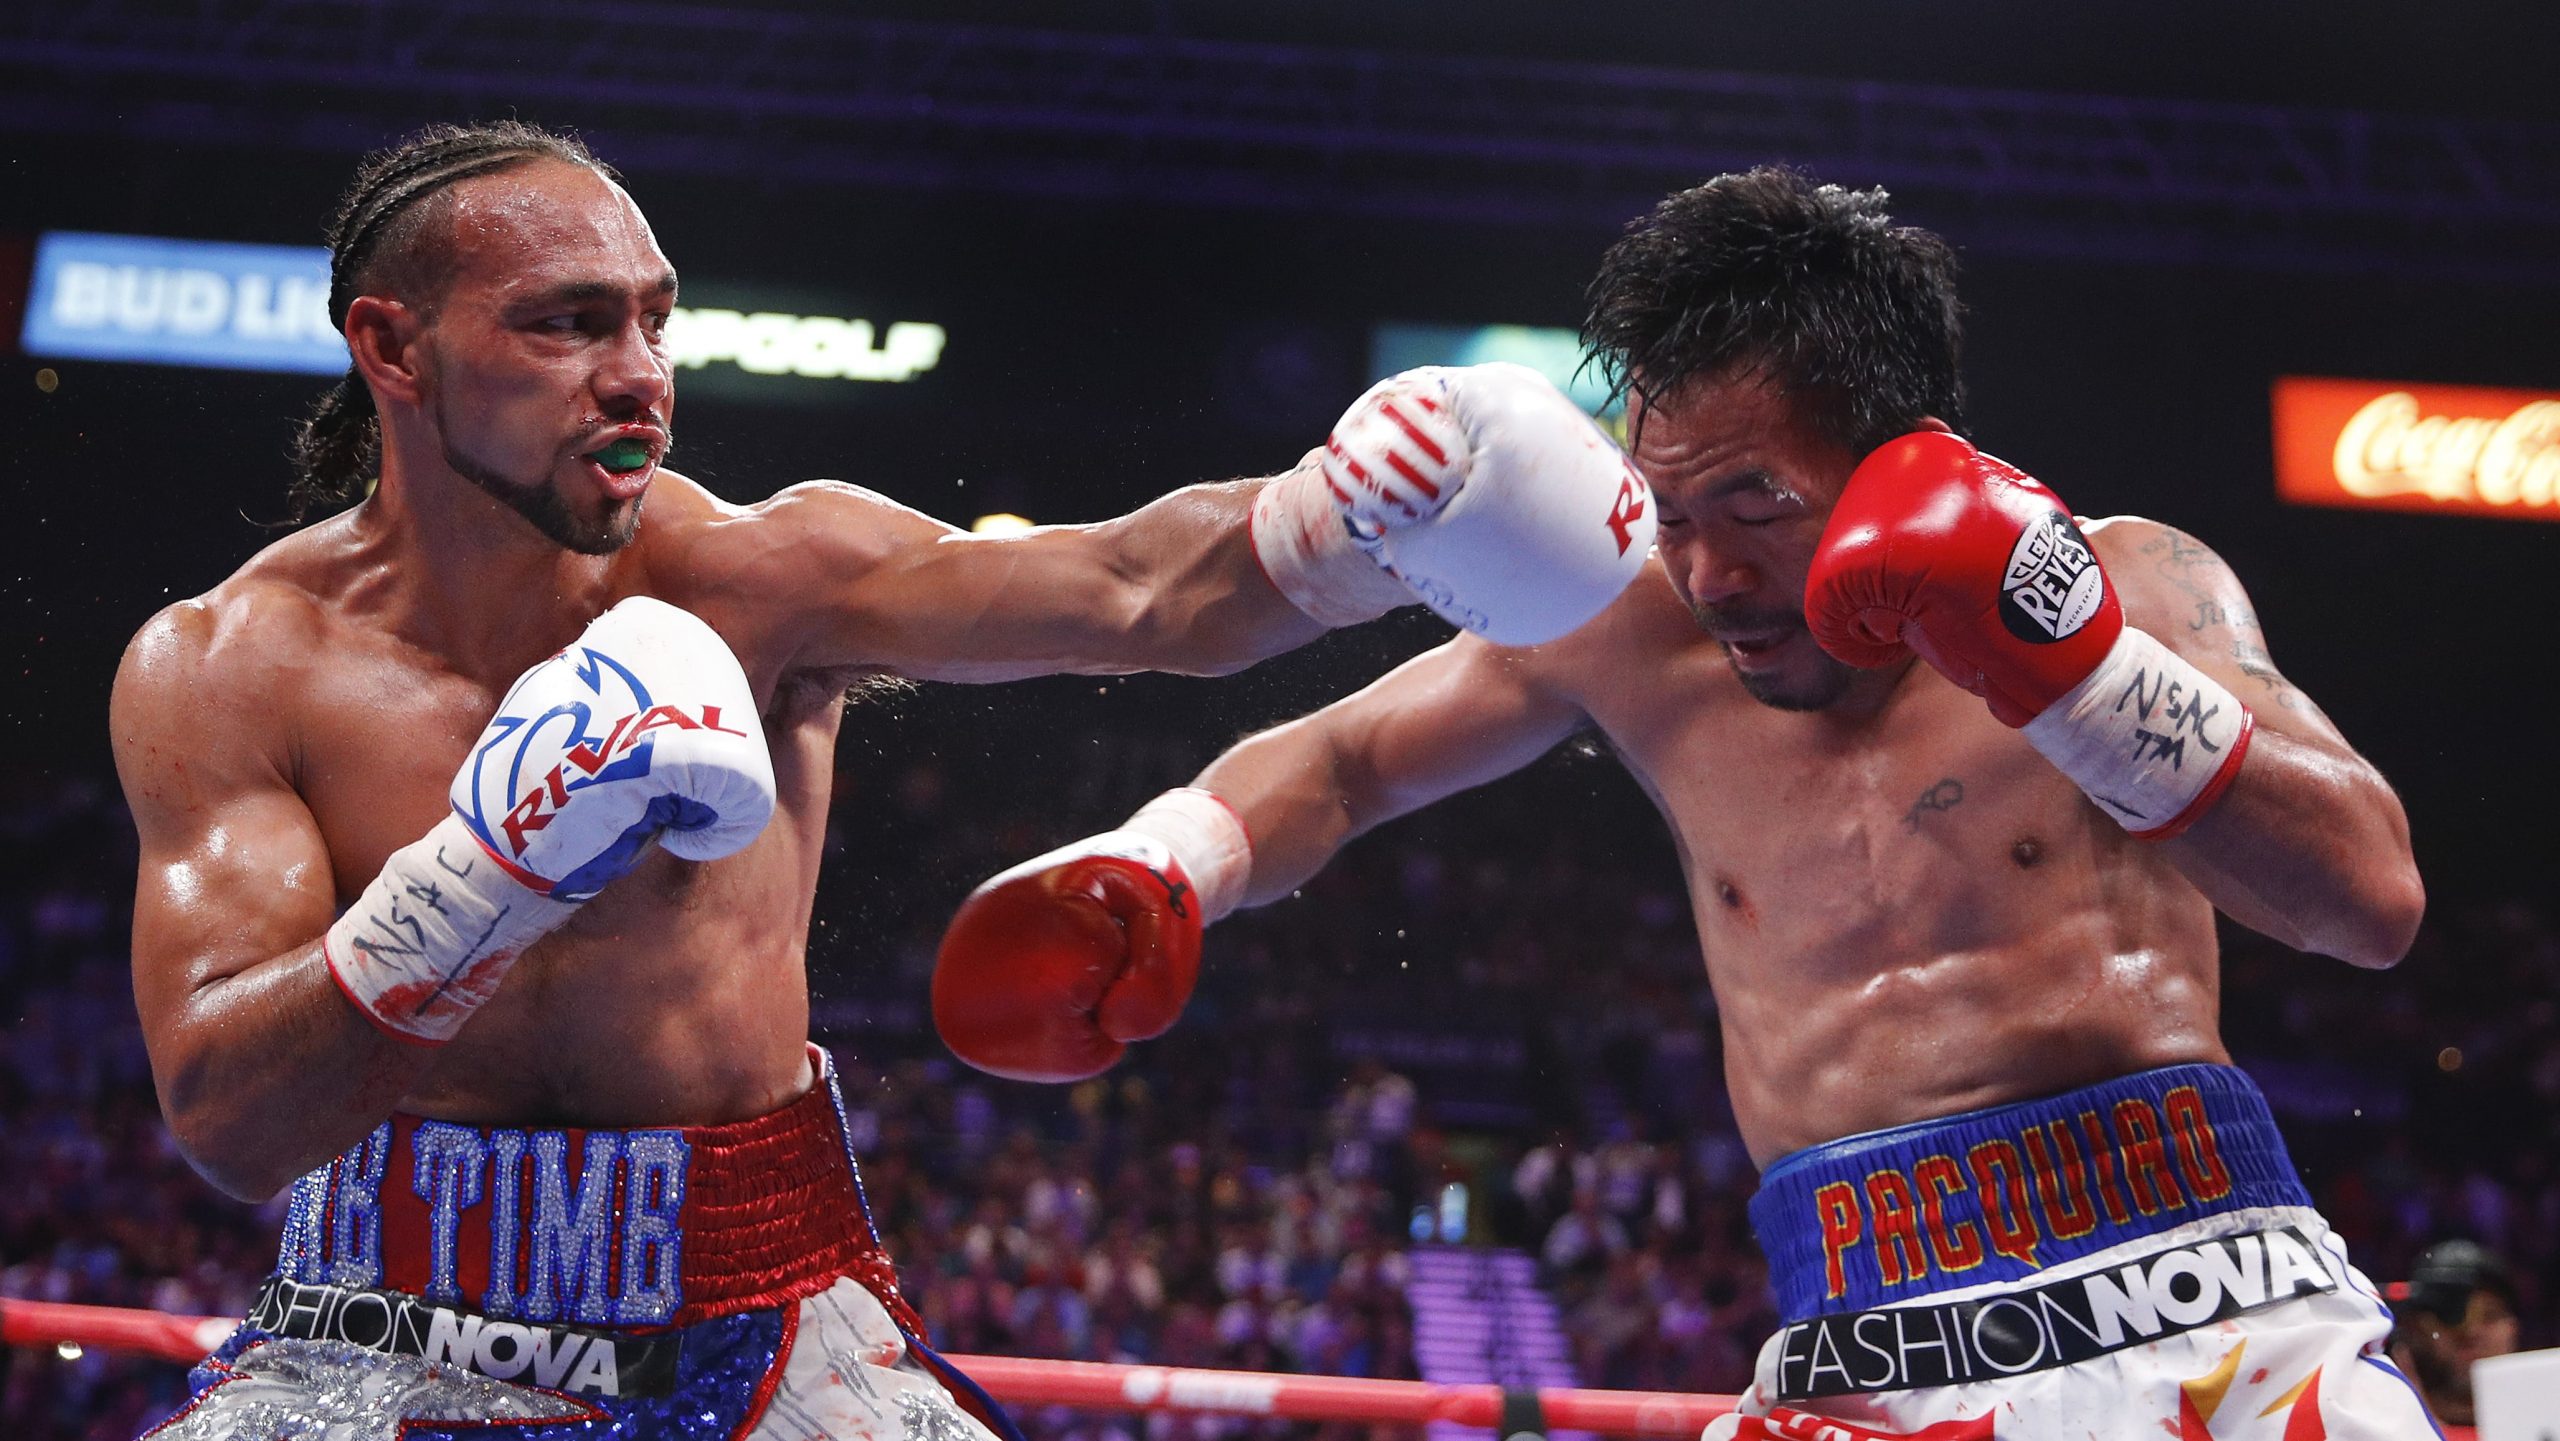 Keith Thurman (left) vs Manny Pacquiao boxing